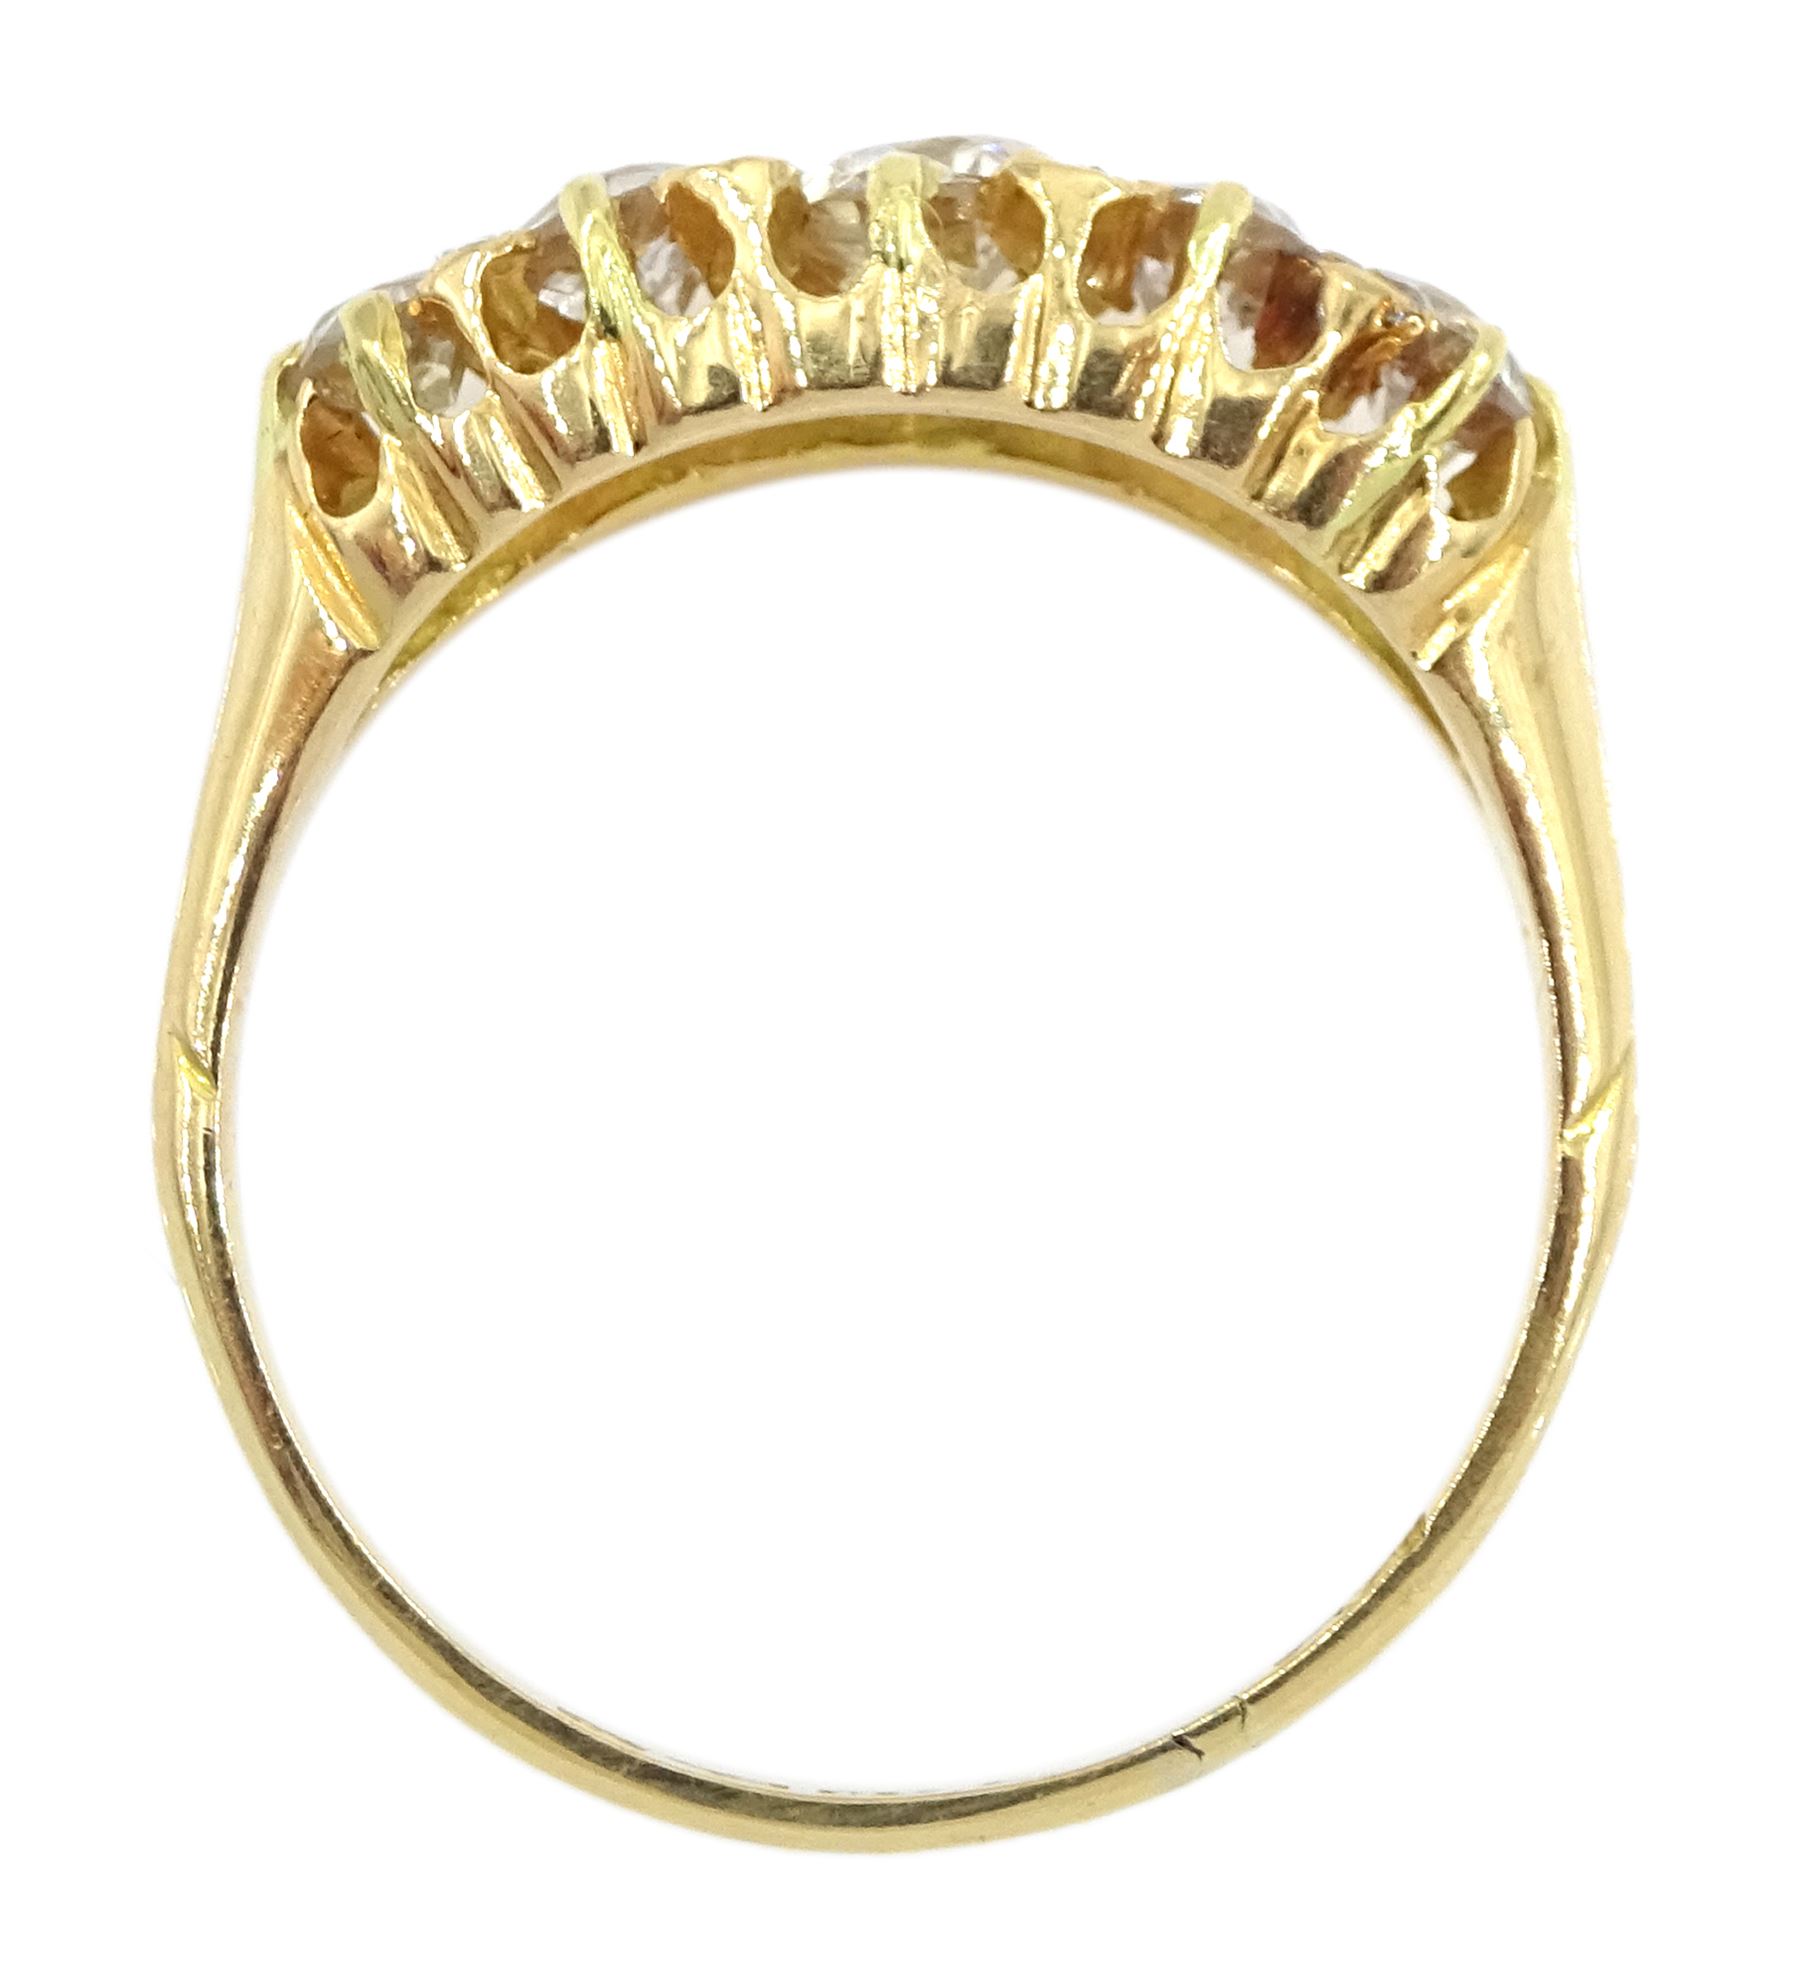 Victorian 18ct gold five stone diamond ring - Image 4 of 4